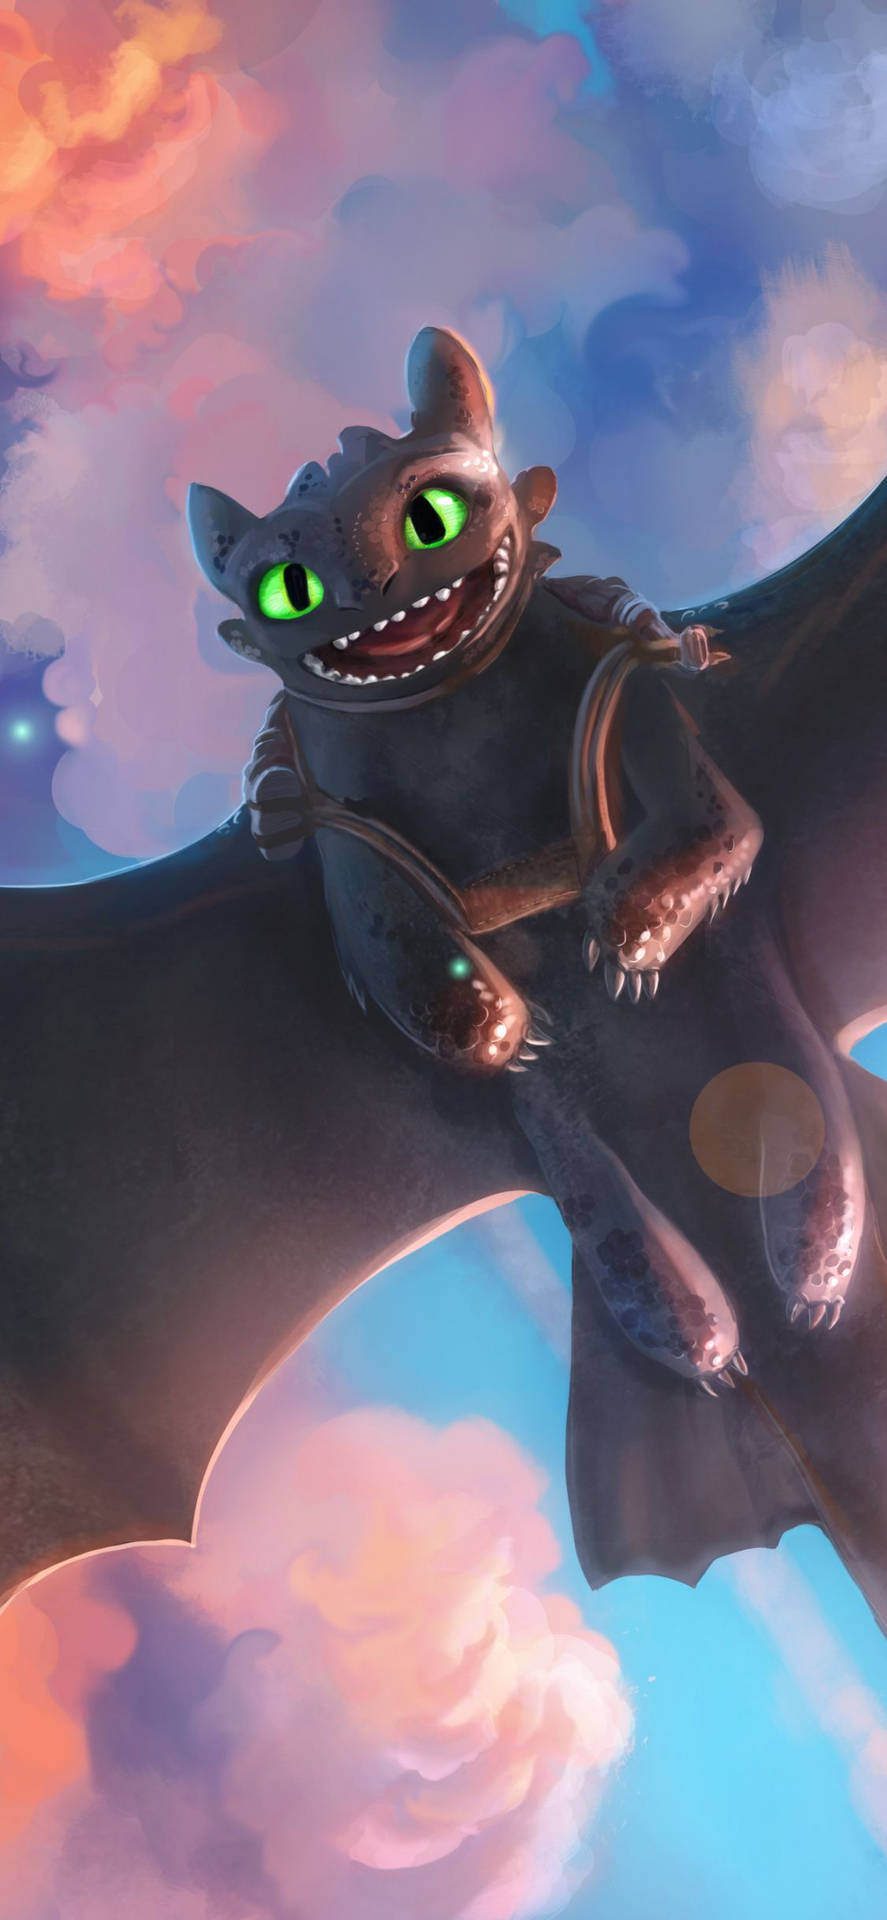 How To Train Your Dragon Smiling Toothless Wallpaper